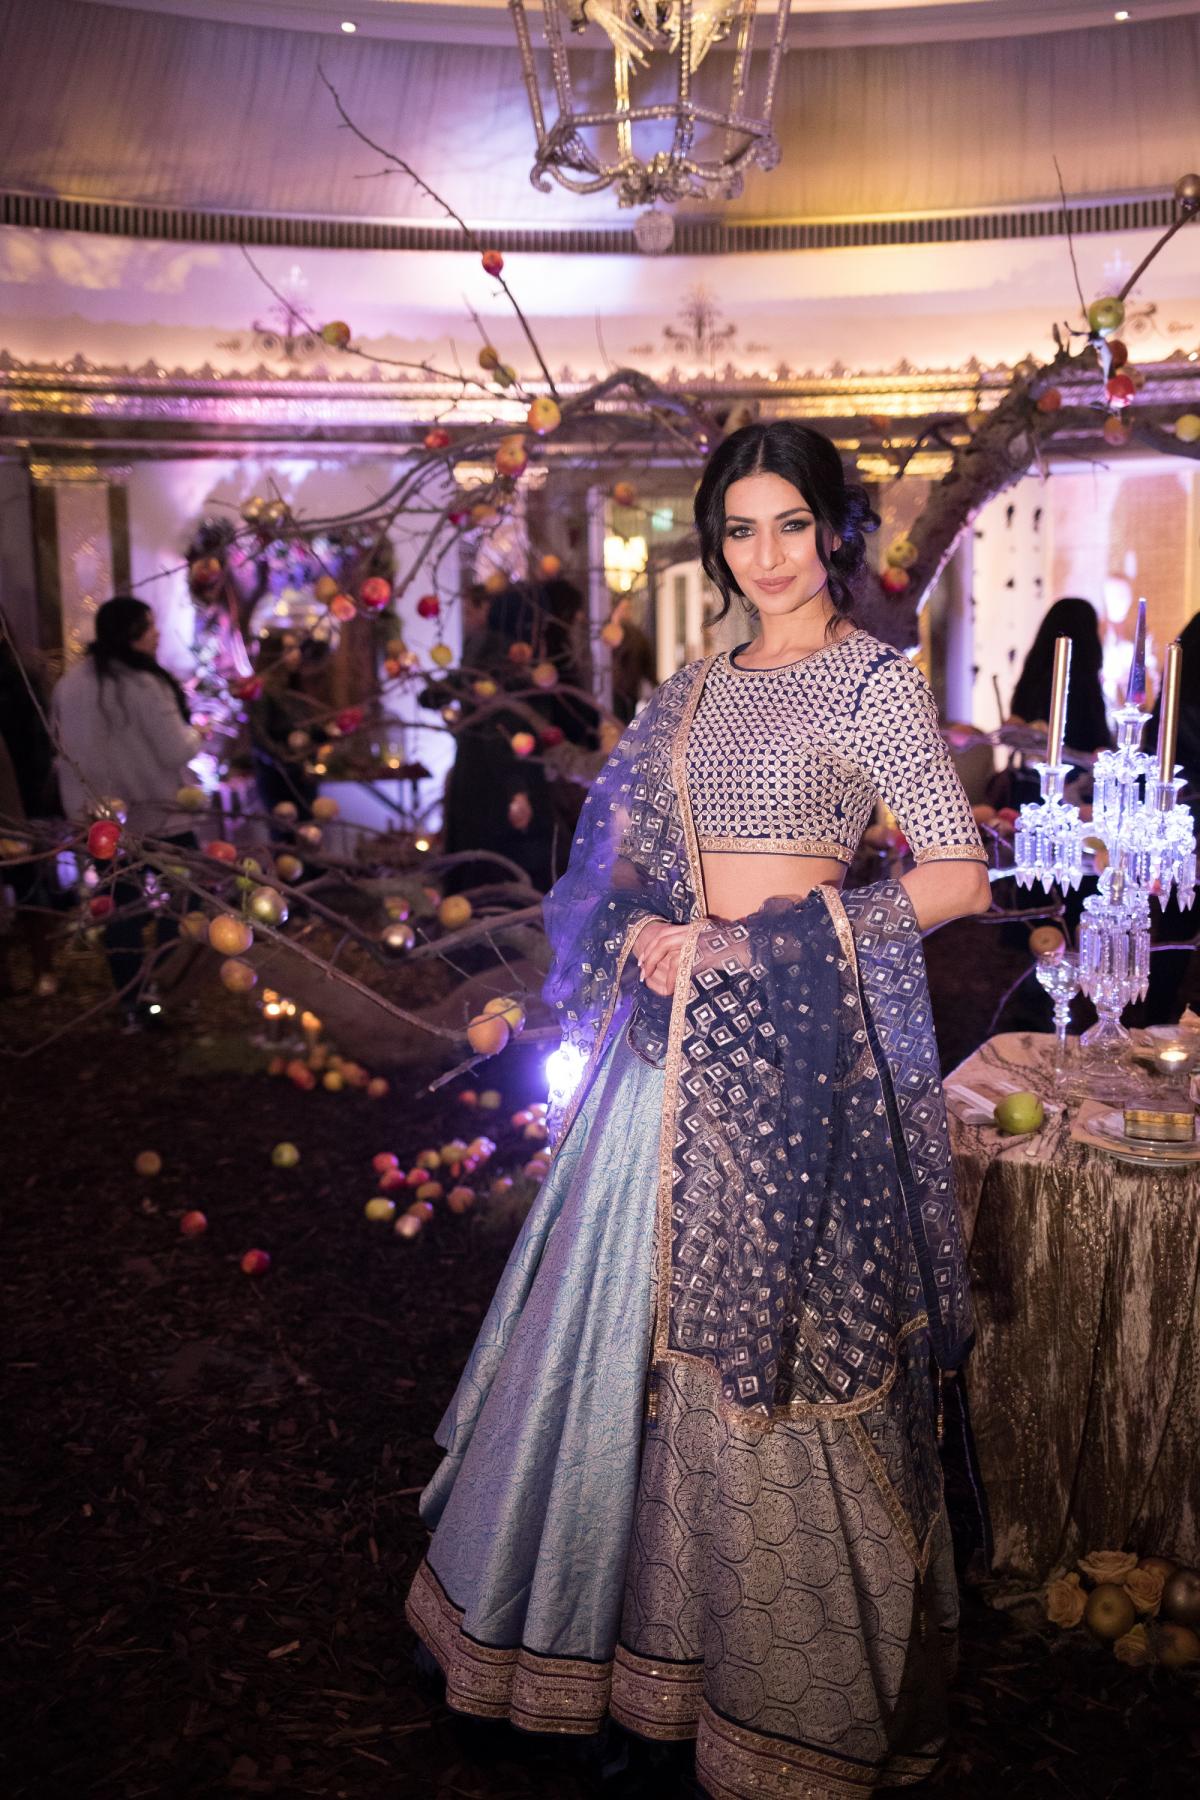 AASHNI + CO Wedding Show held at The Dorchester Hotel, Park Lane, London January 2017